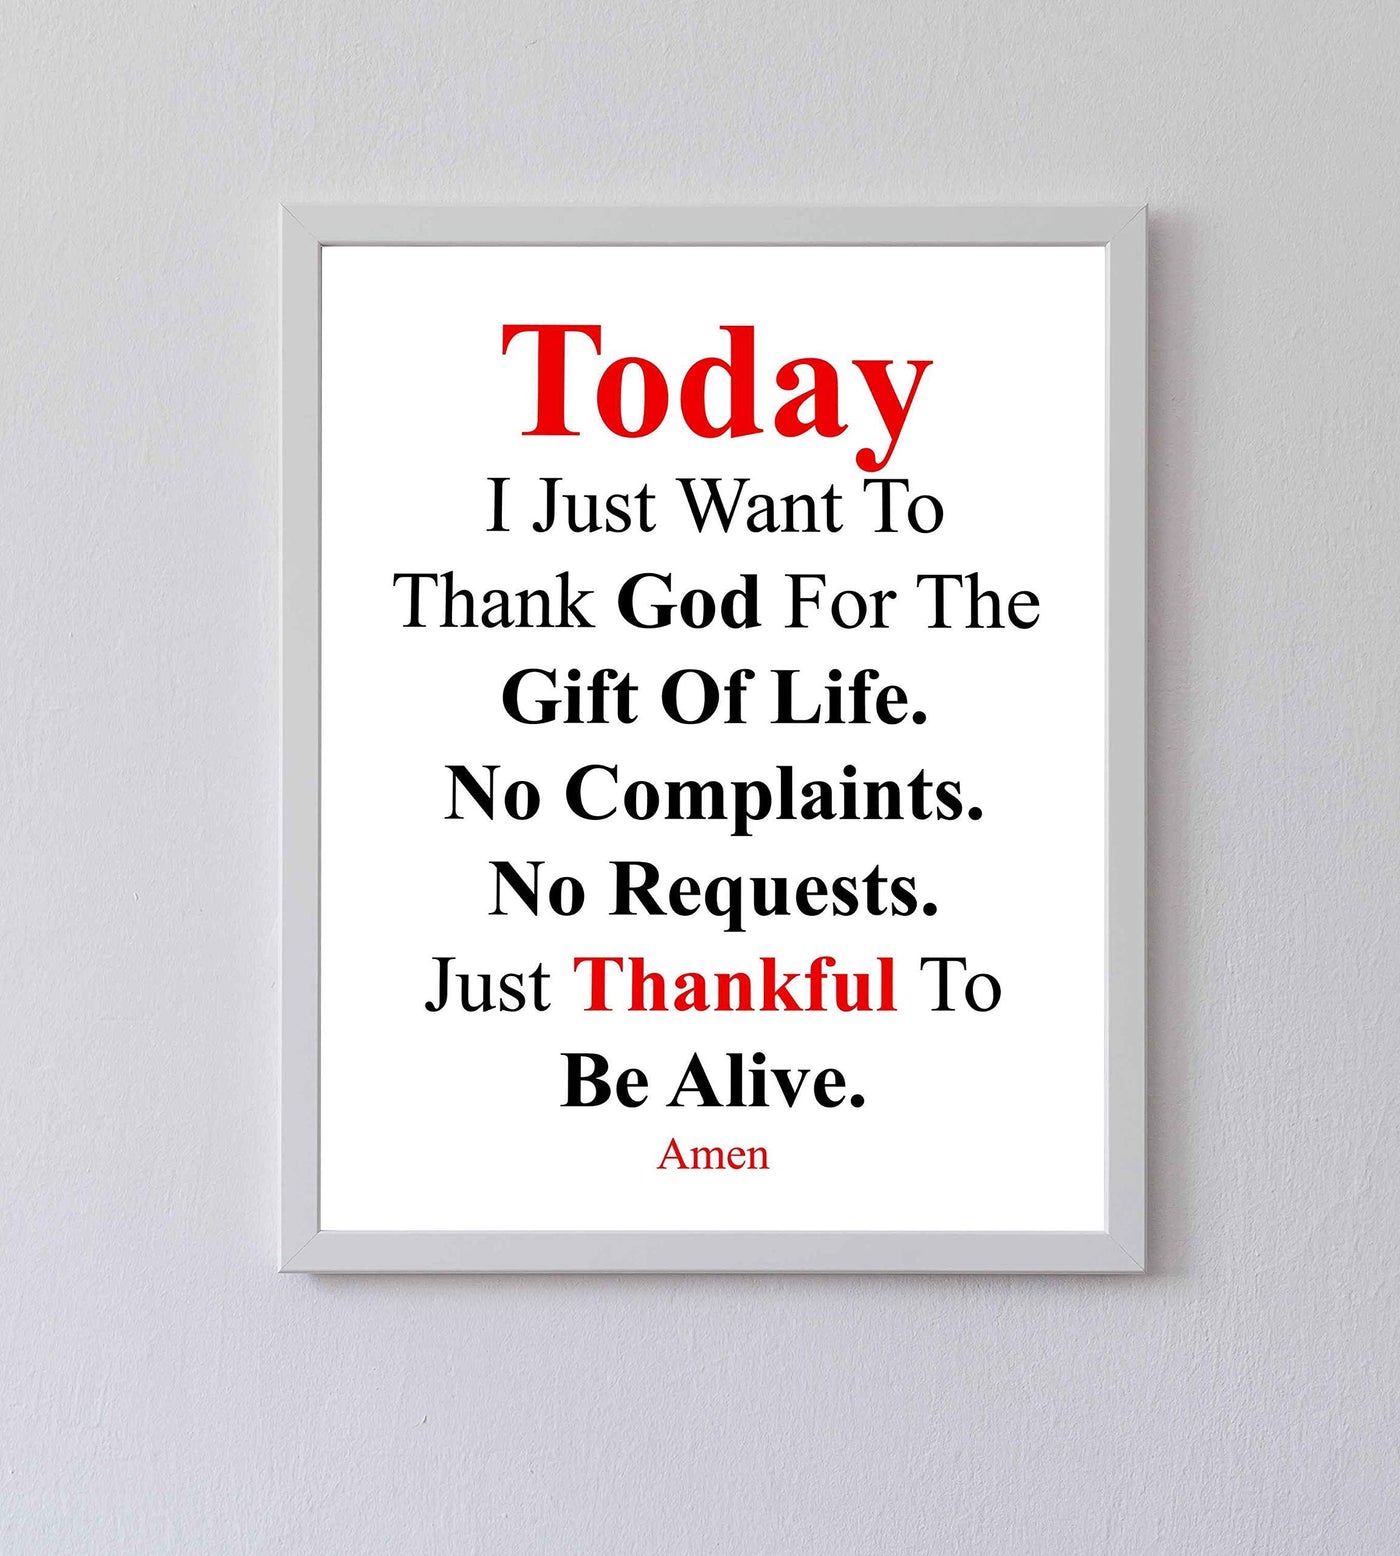 Today I Just Want To Thank God Prayer Wall Art Sign -8 x 10" Modern Typographic Poster Print-Ready to Frame. Inspirational Decor for Home-Office-Church. Perfect Christian Gift! Give Thanks to God!